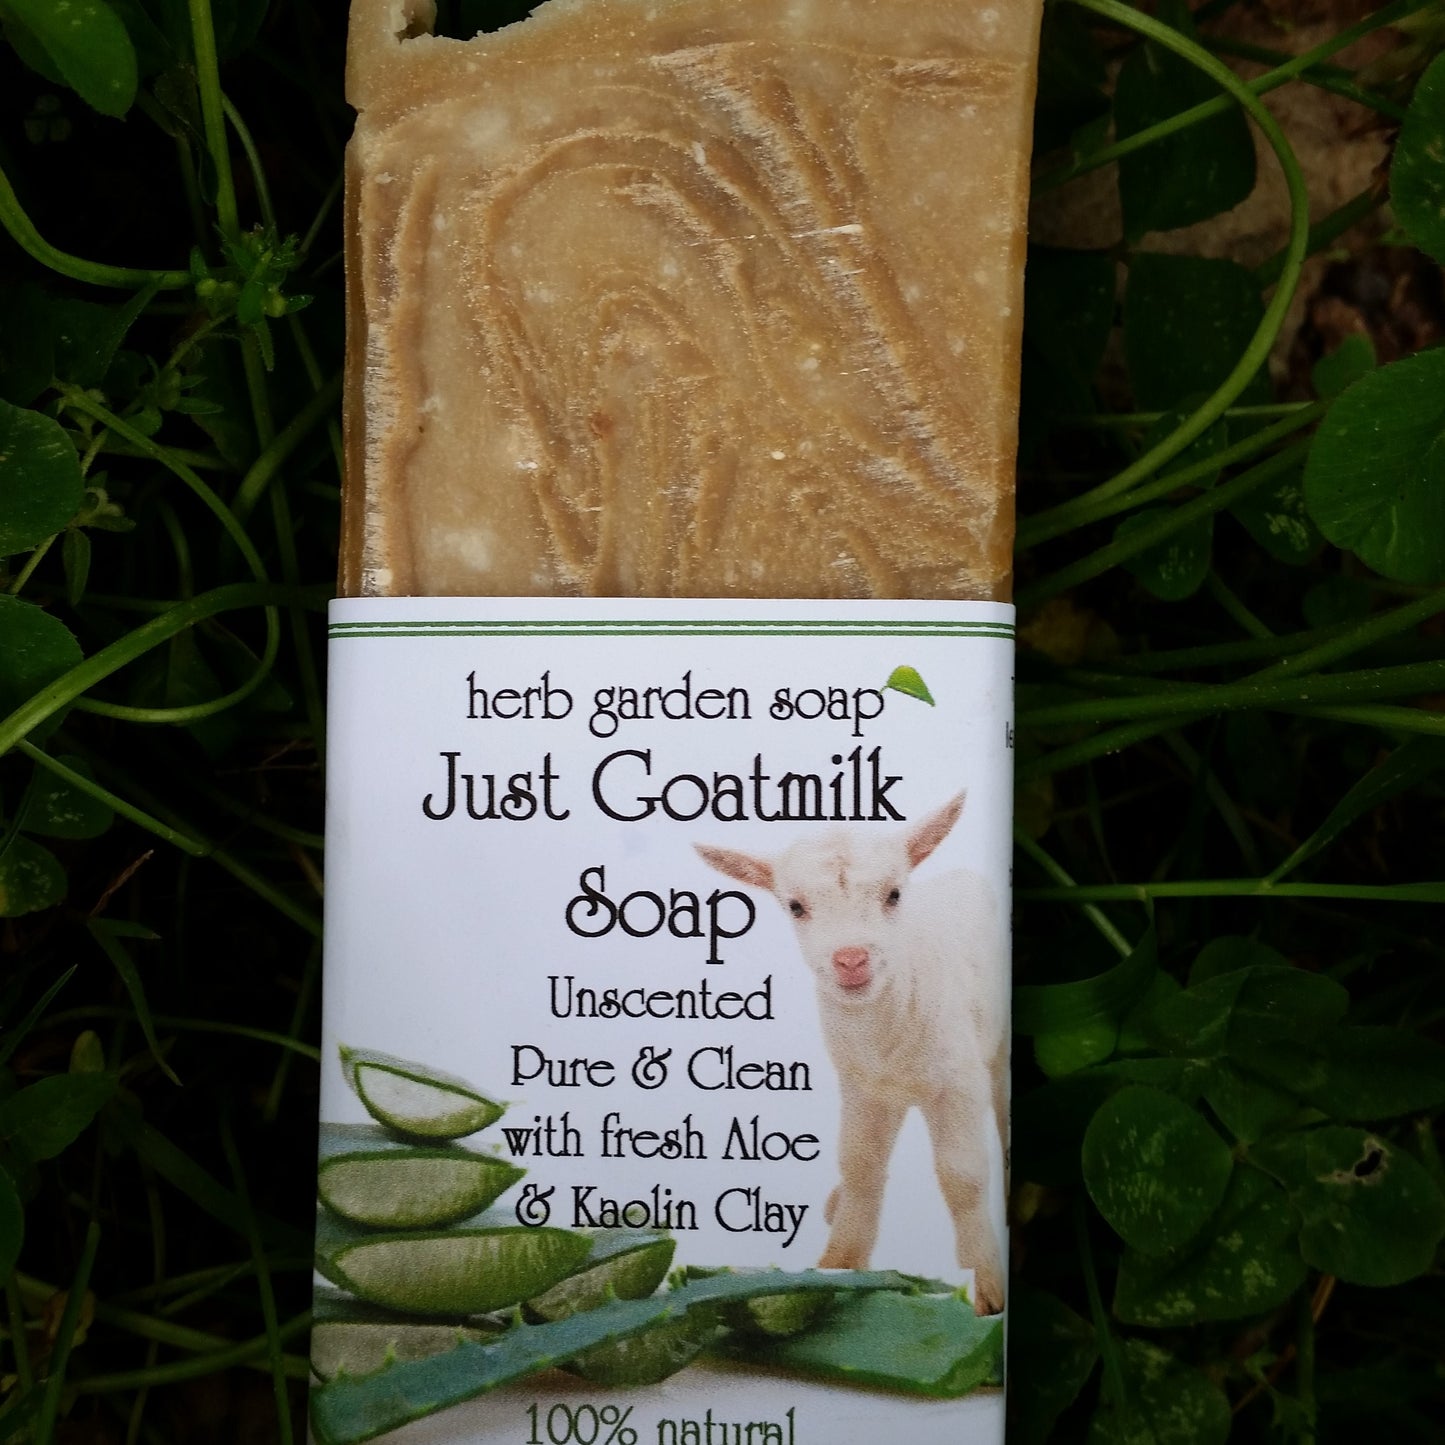 Just Soap with Goats Milk and Aloe Vera